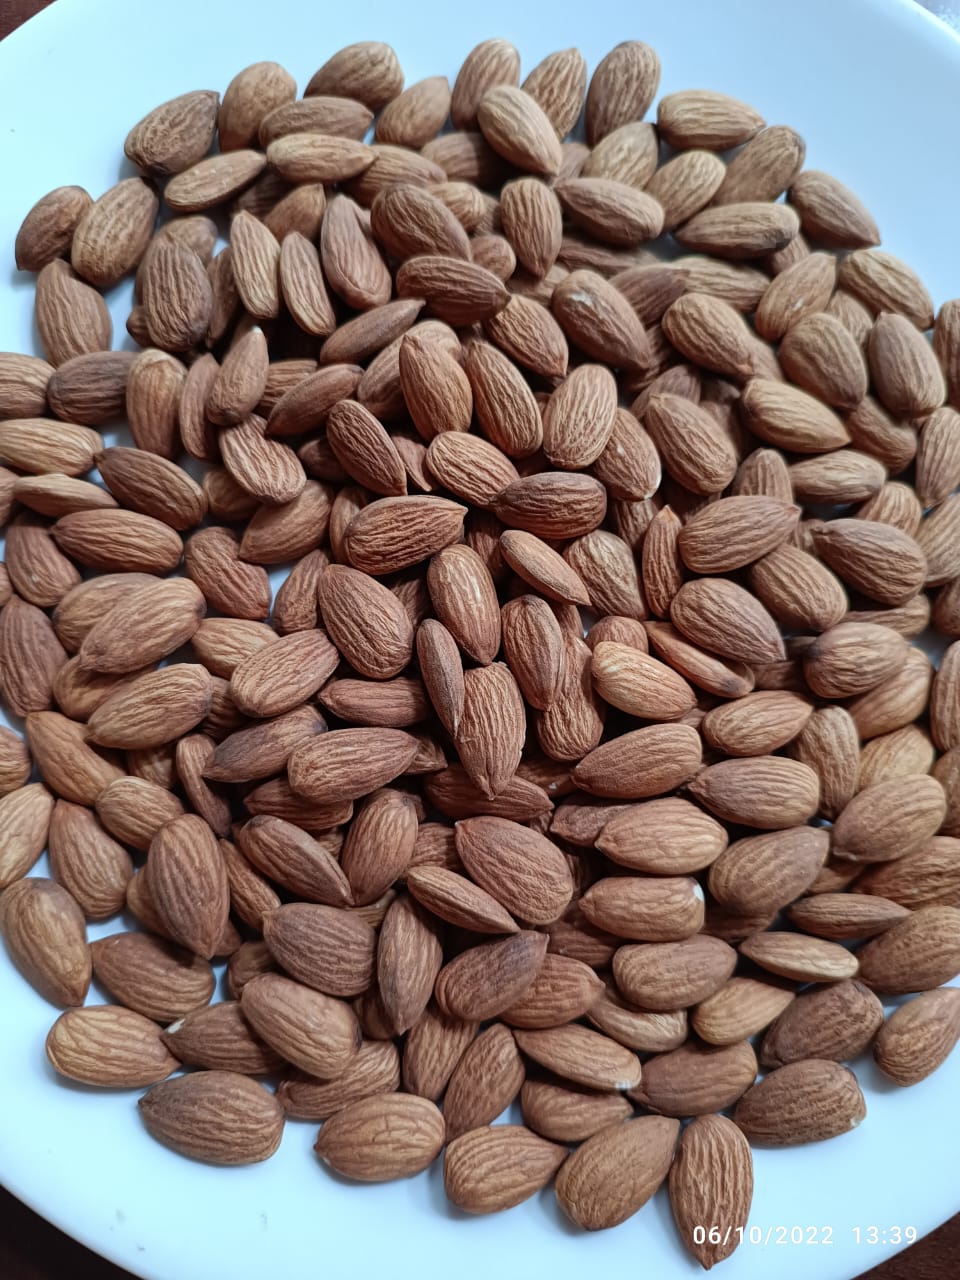 Buy Natural Almonds in India